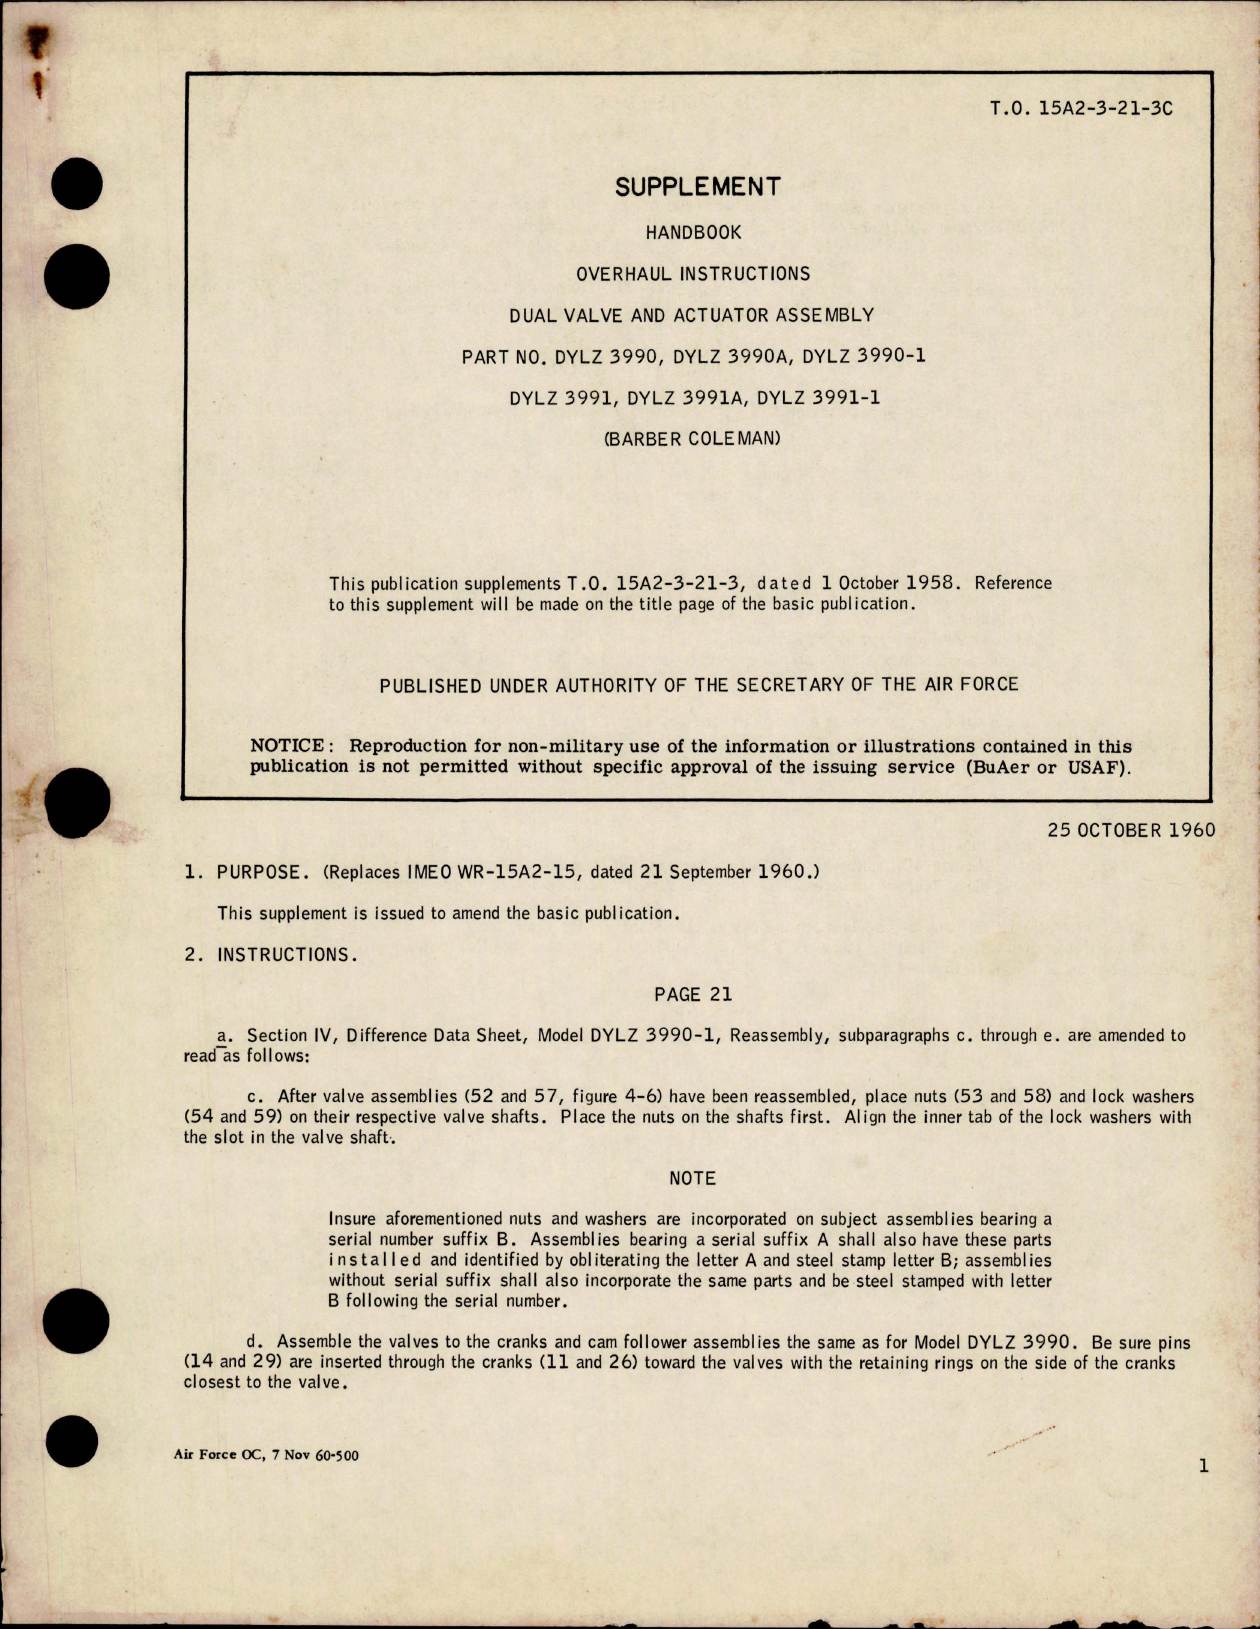 Sample page 1 from AirCorps Library document: Supplement to Overhaul Instructions for Dual Valve and Actuator Assembly